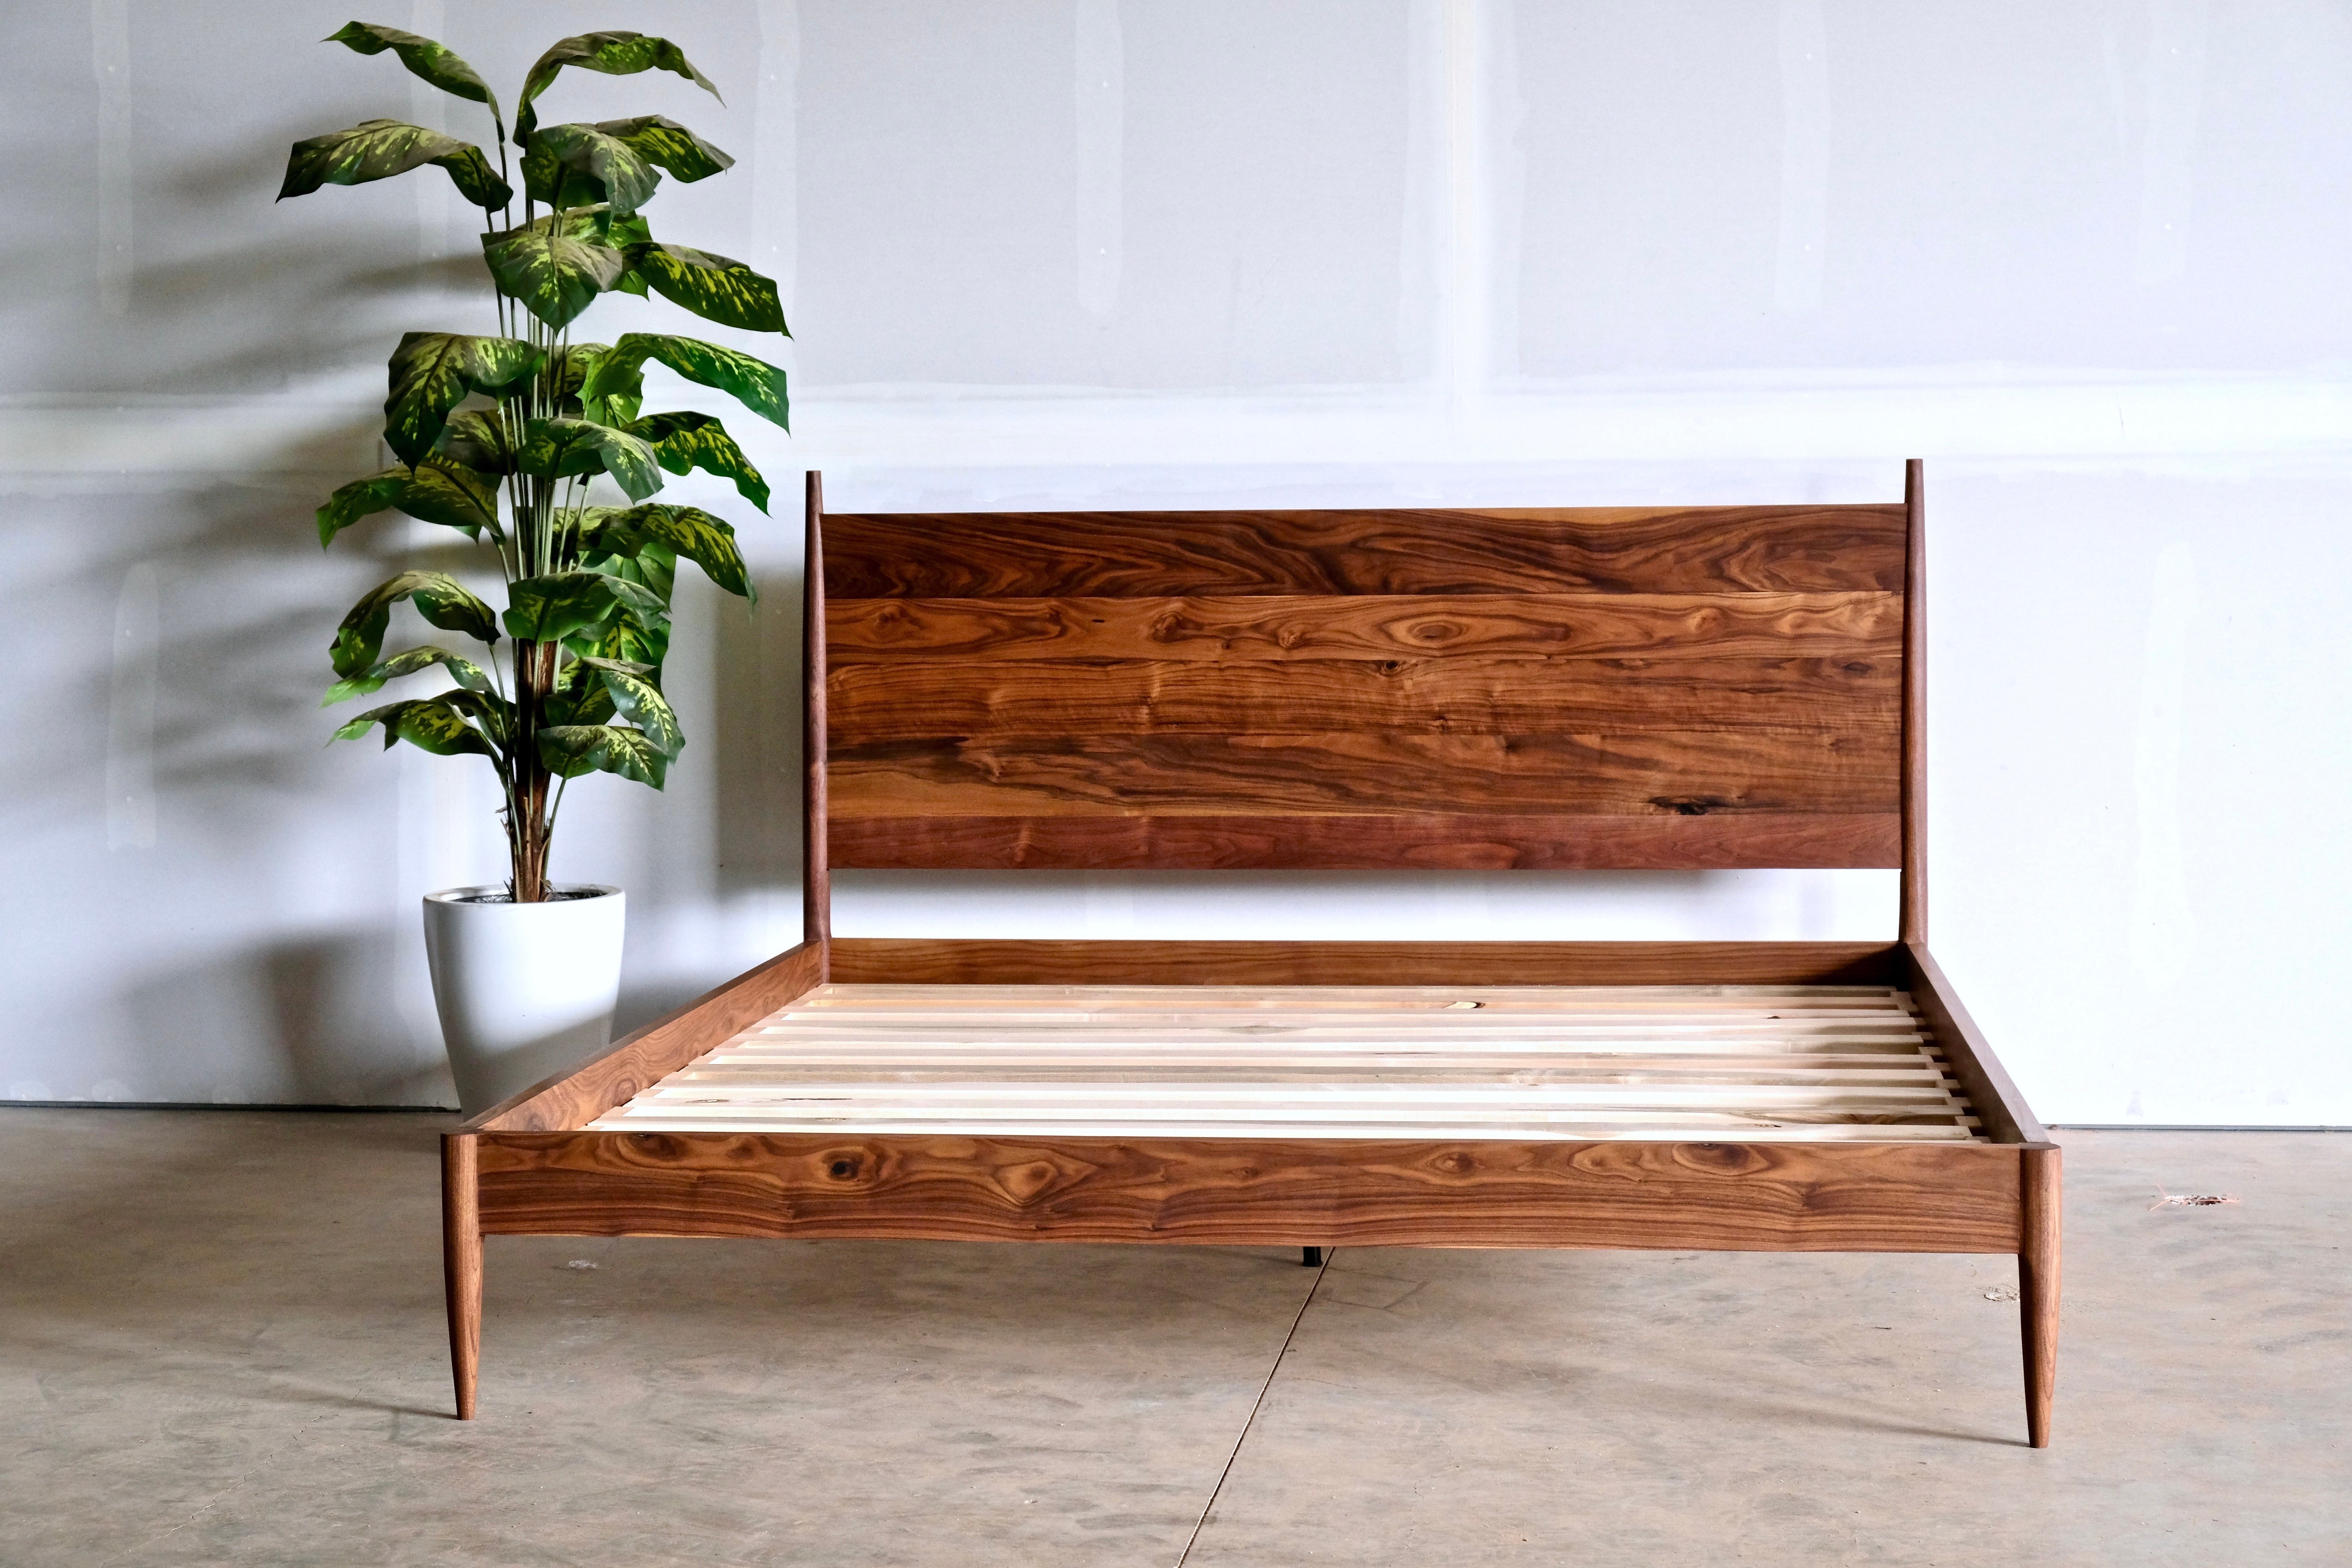 Bed No. 4.5

This is a modern take at a classic and timeless shaker shape. Turned tapered legs fit seamlessly into our solid wood headboard and footboard panels.

WOOD TYPE
Pictured: Walnut
Available in any domestic hardwood including Walnut, Maple,